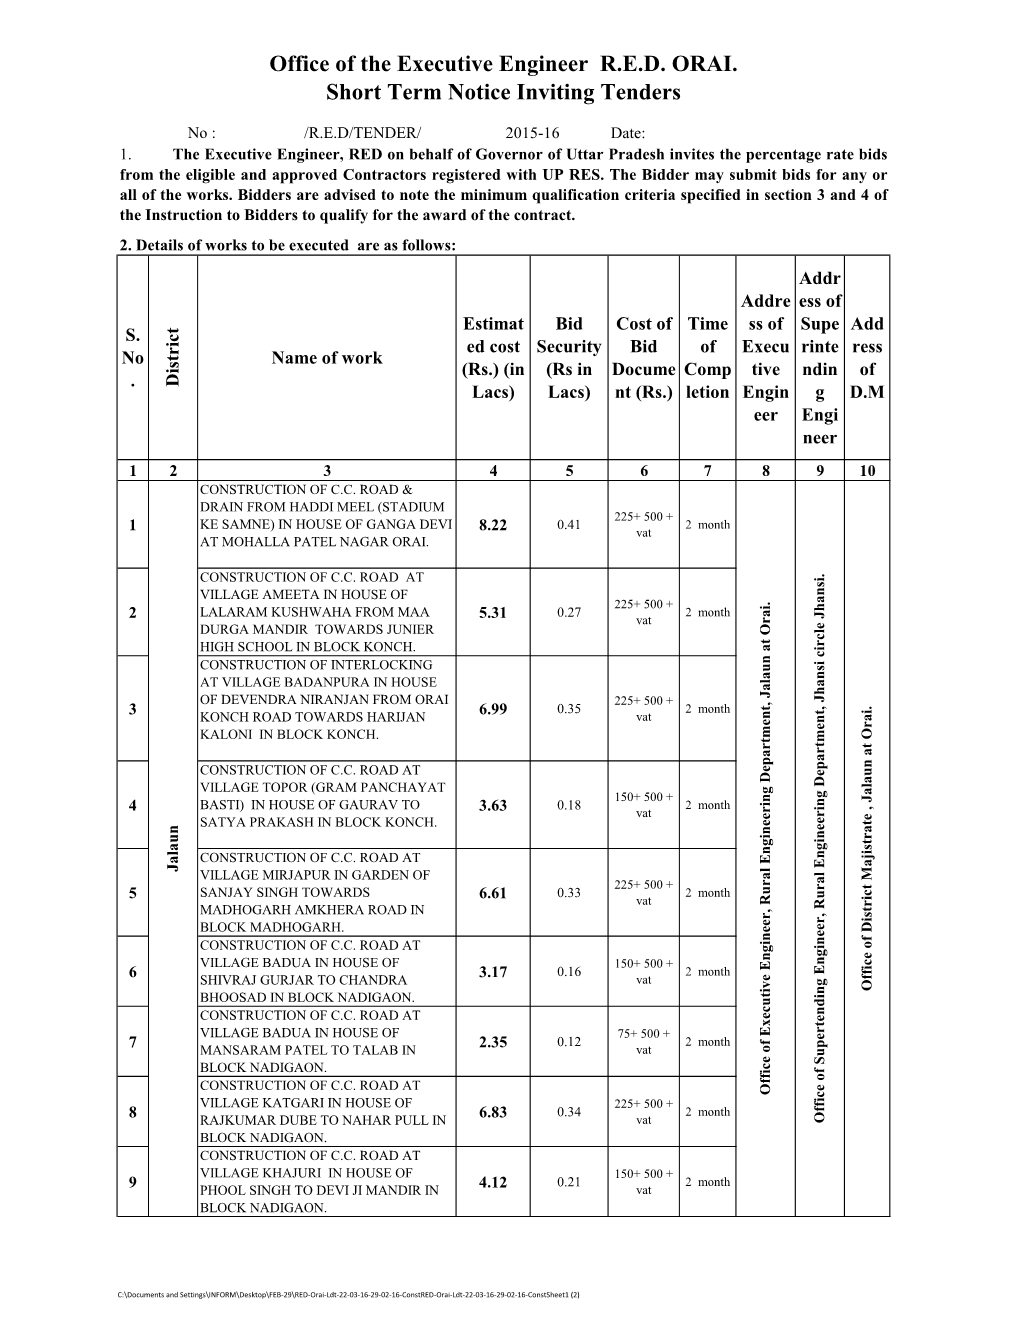 Office of the Executive Engineer R.E.D. ORAI. Short Term Notice Inviting Tenders